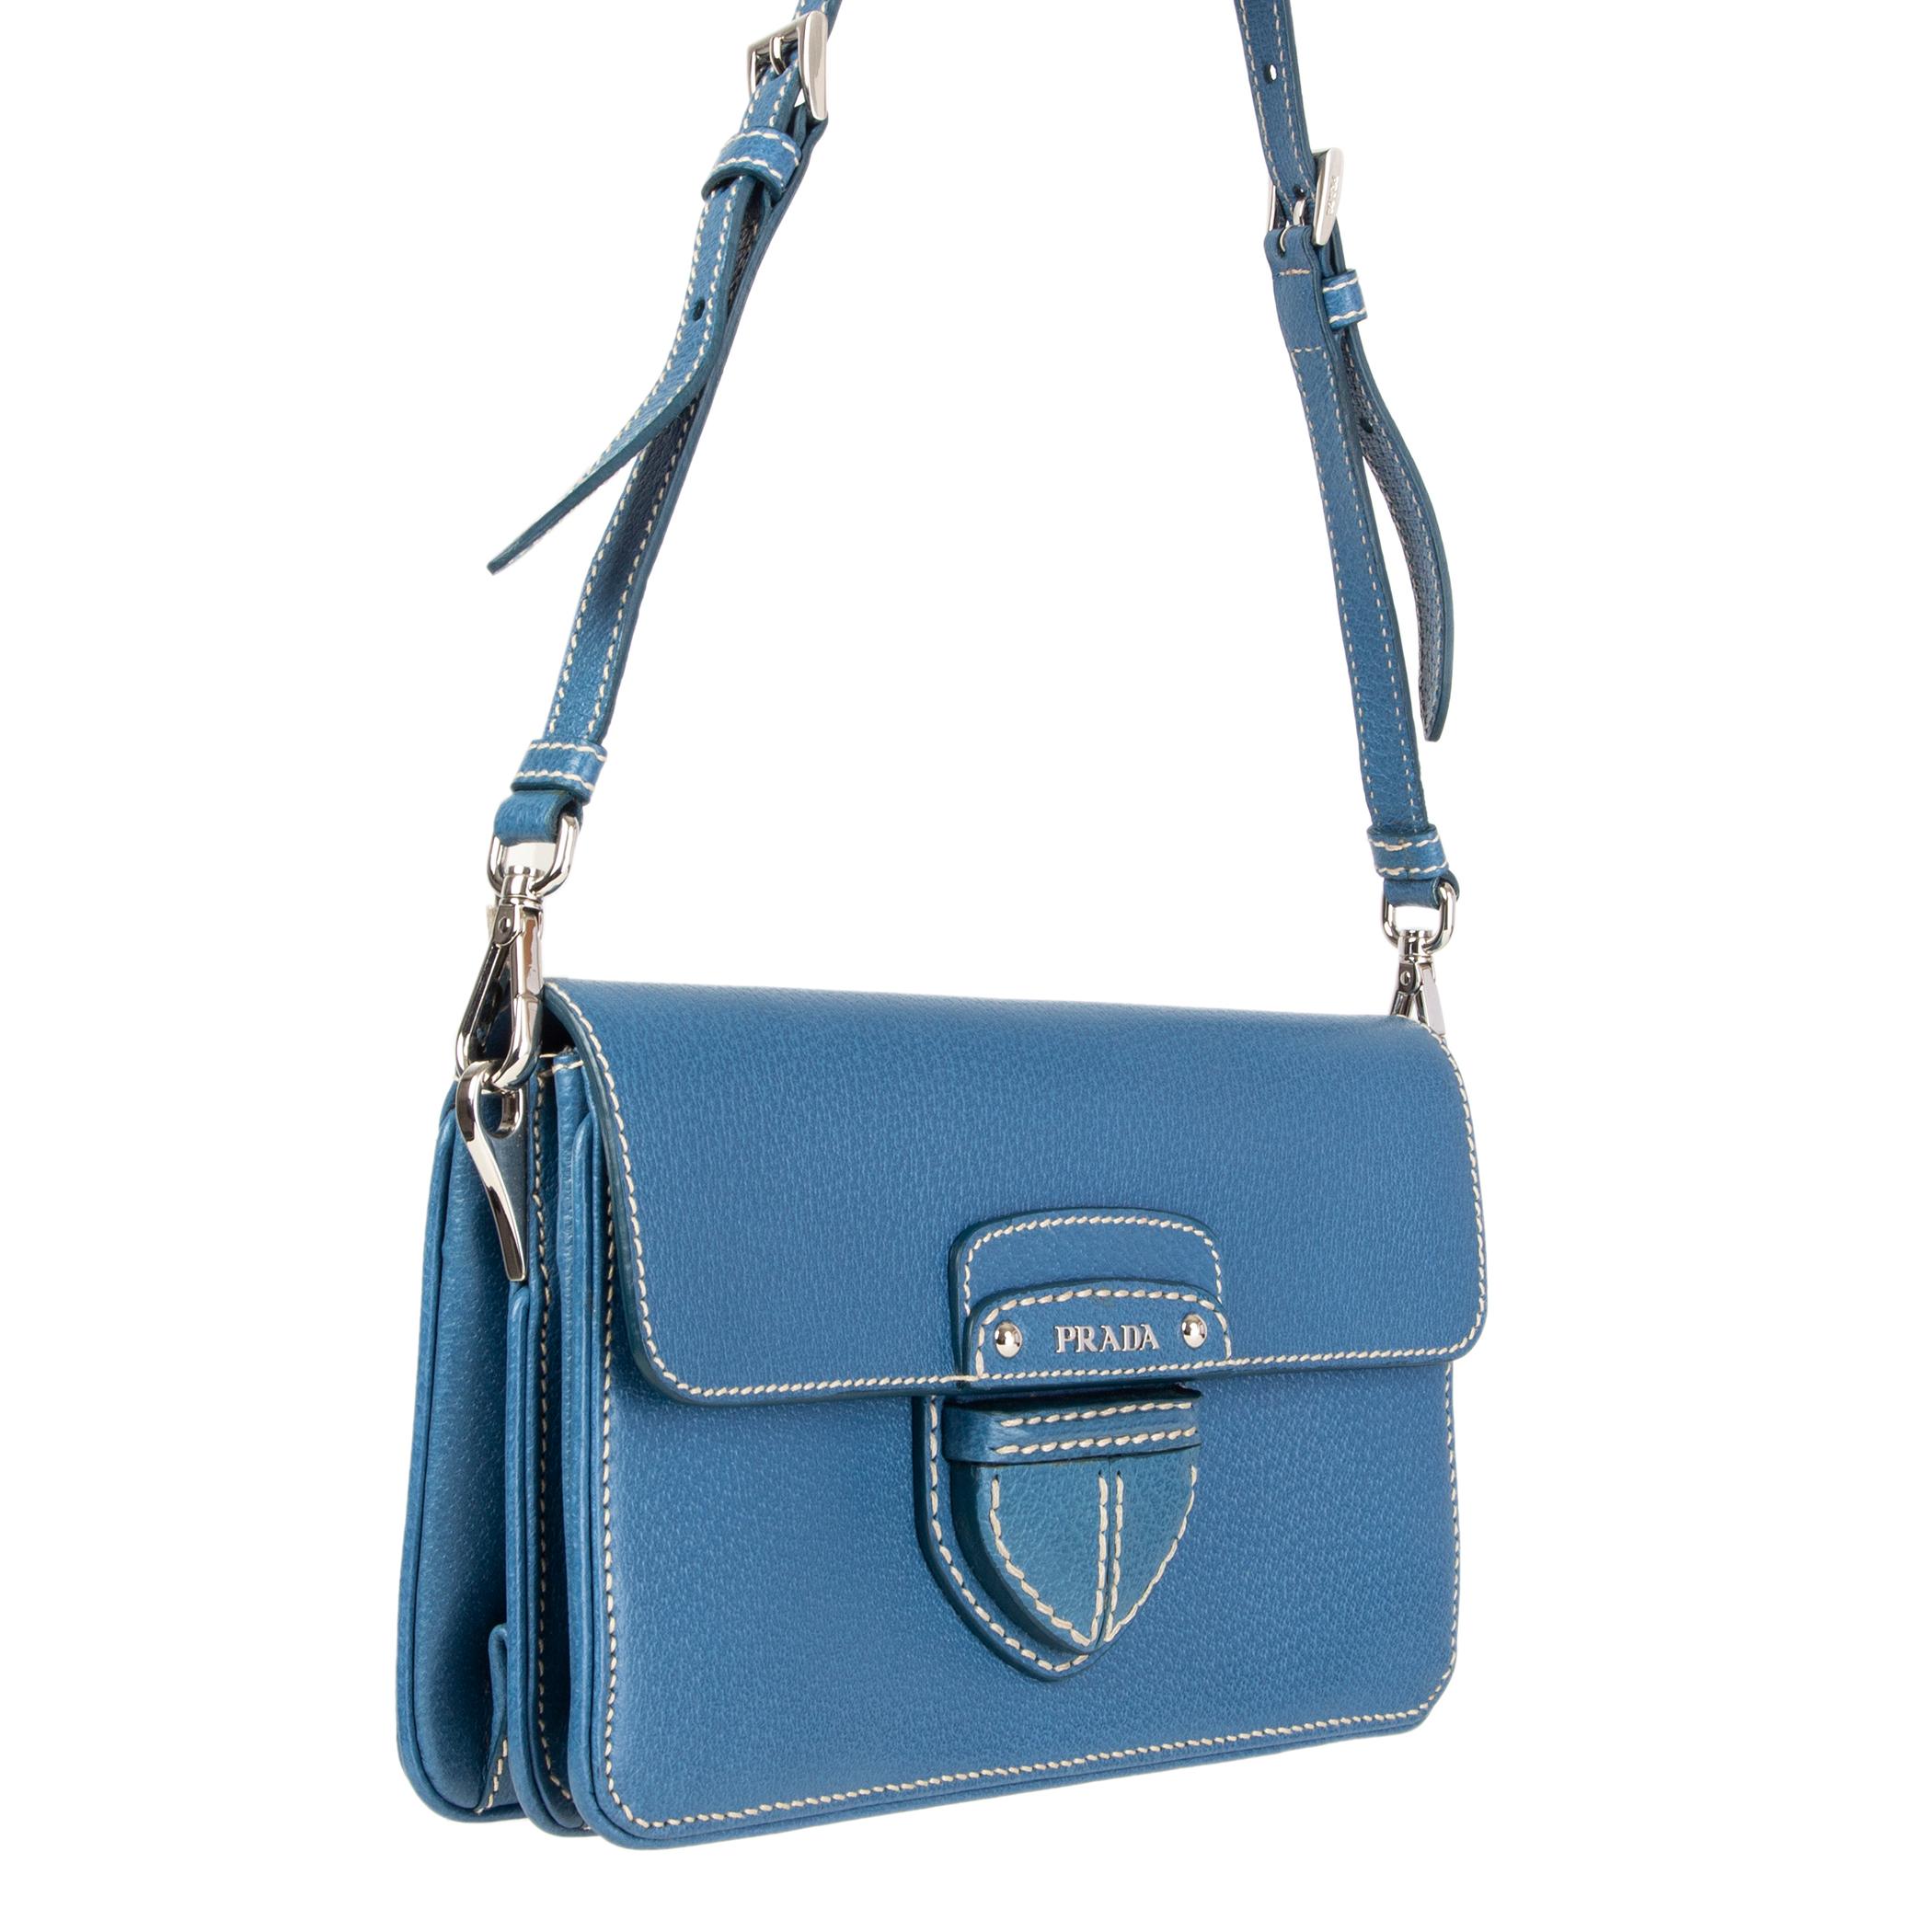 Prada crossbody bag in blue Cinghiale (pigskin) leather with contrasting white stitching. Detachable shoulder strap - can be carried as a clutch as well. Closes with a magnetic-snap on the front. Inside is divided into two compartements. Lined in